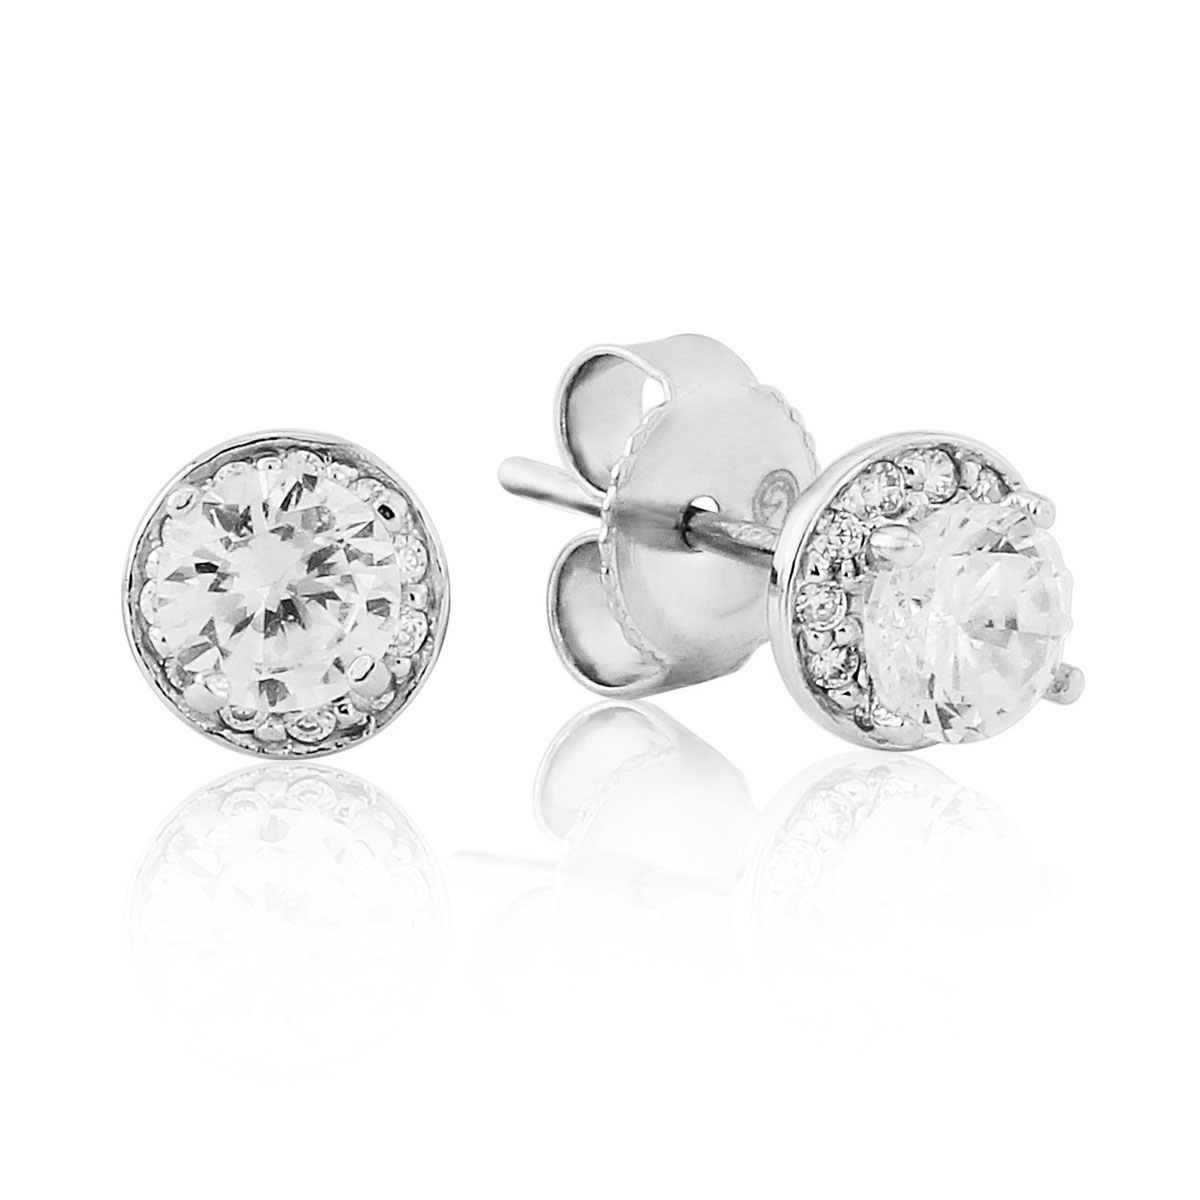 Waterford Jewelry Sterling Silver Earrings Small Cluster Round Stud